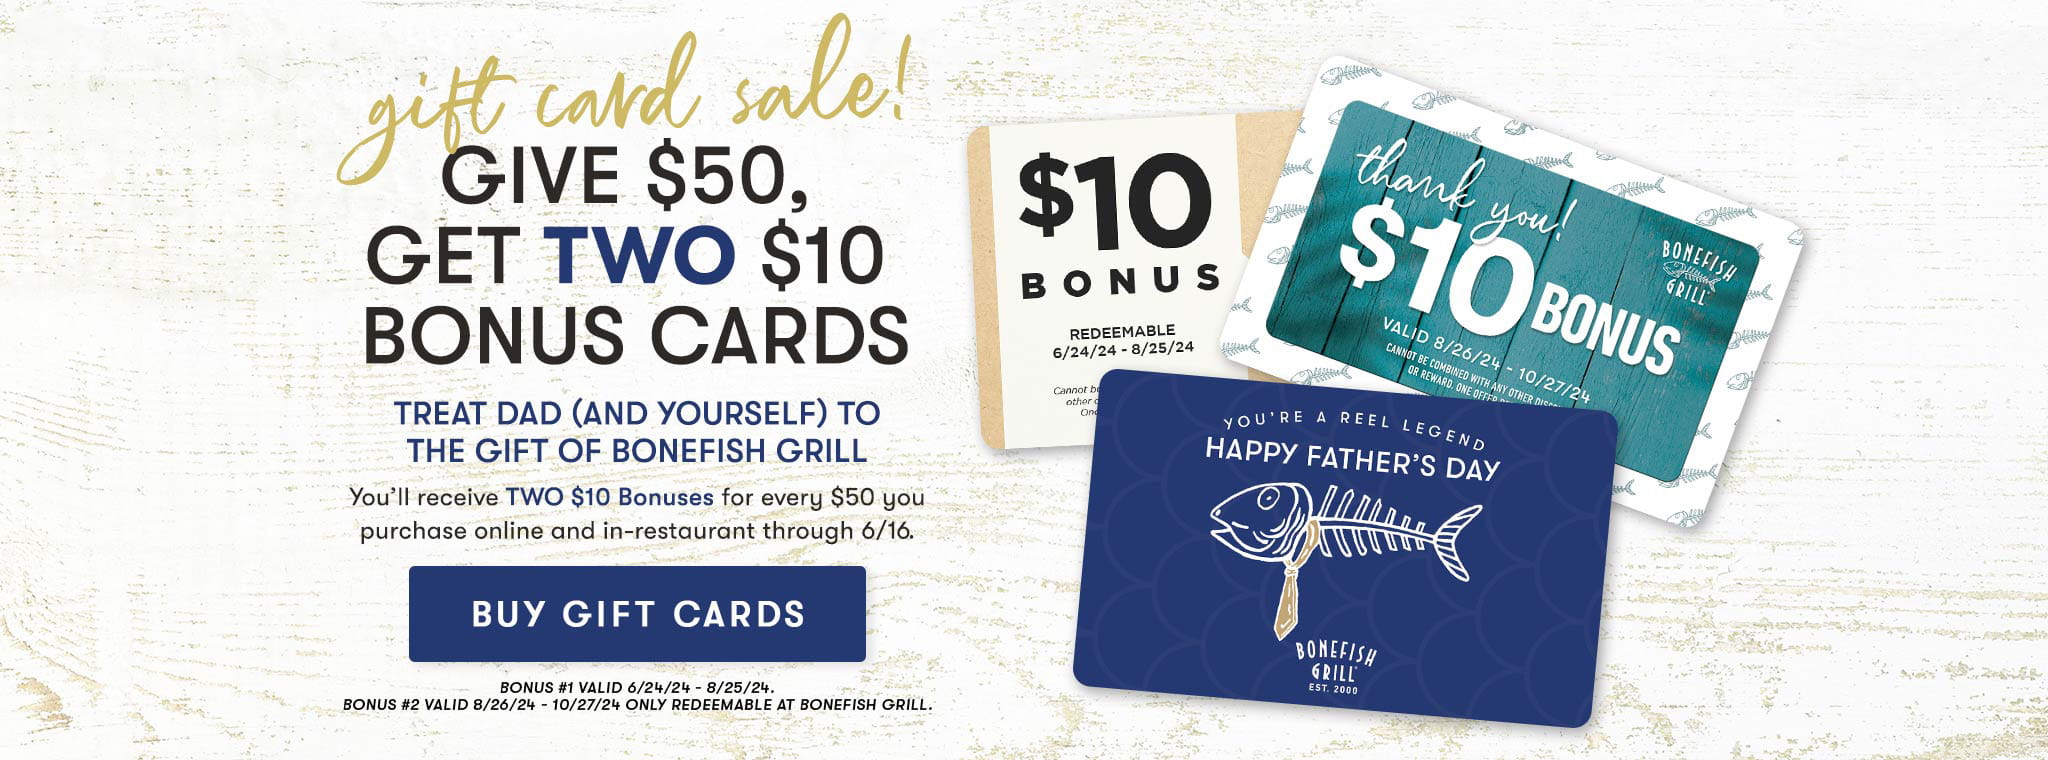 Give $50, Get Two $10 Bonus Cards